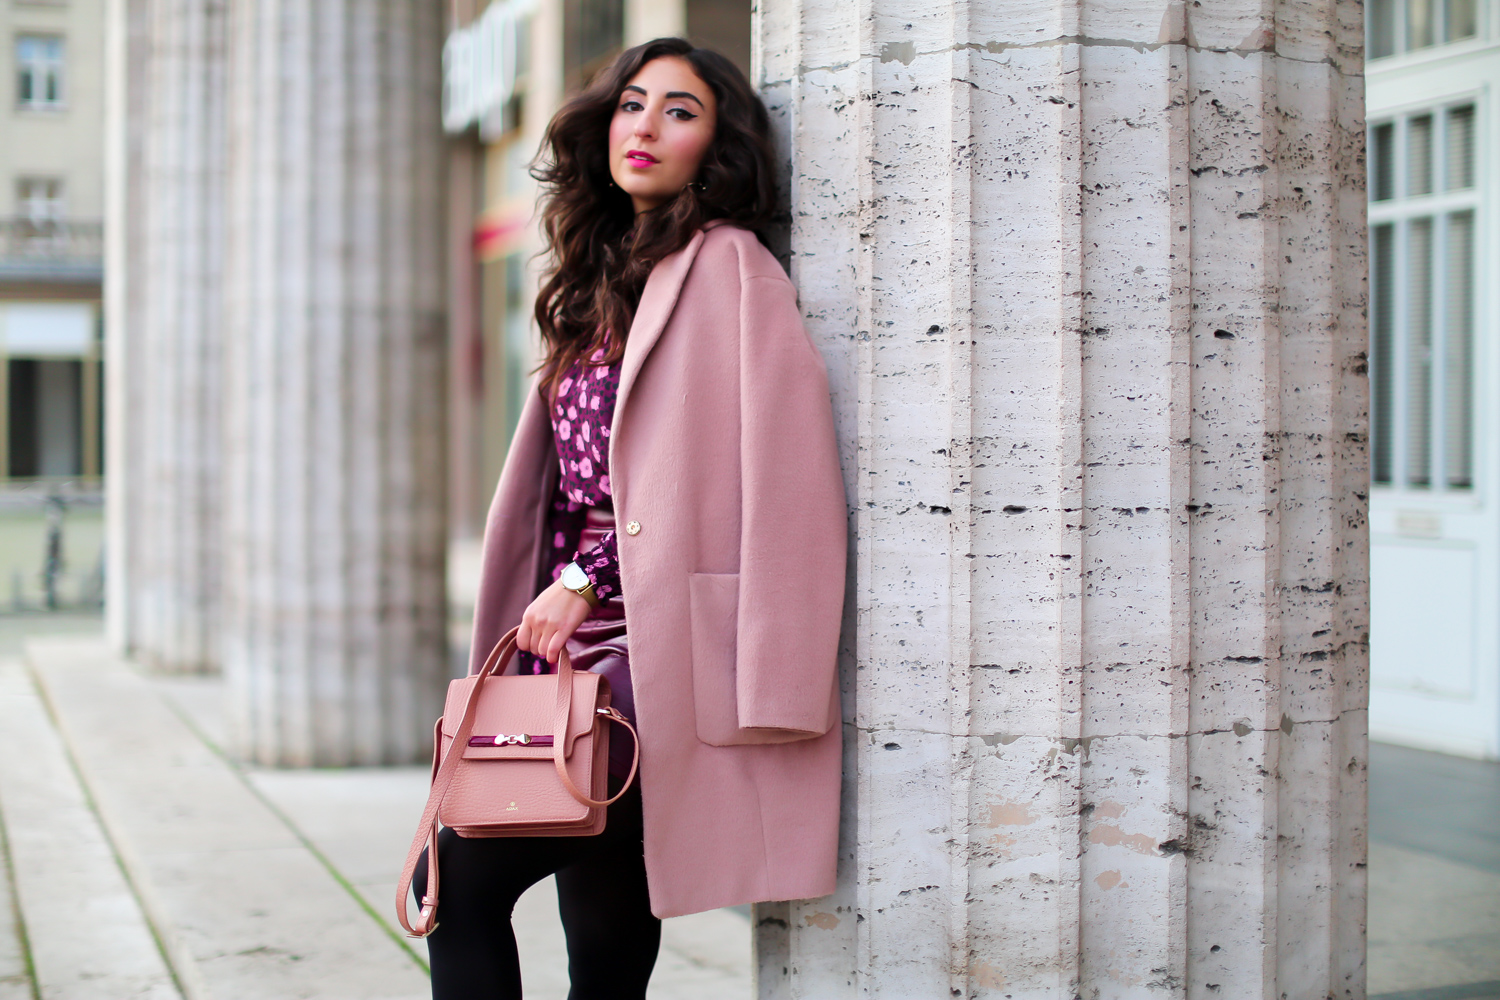 Leather Skirt and Flower Blouse t and highneck all burgundy outfit fall style flattered adax minirock inspired herbst look streetstyle mode blog samieze berlin_-9.jpg